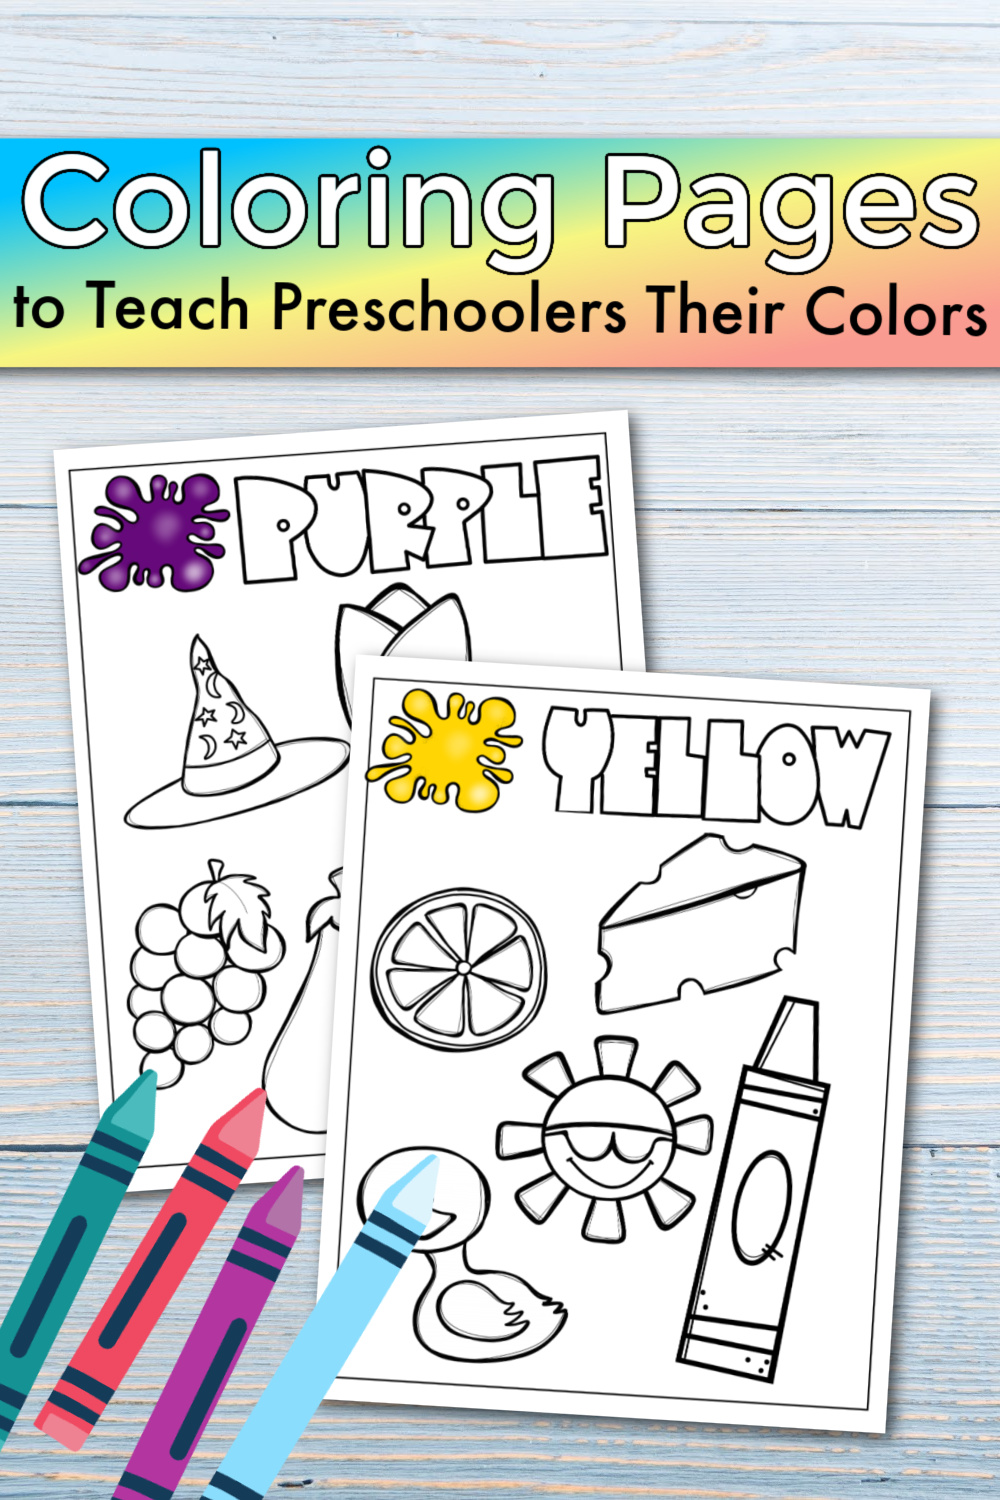 Free printable coloring pages to learn colors